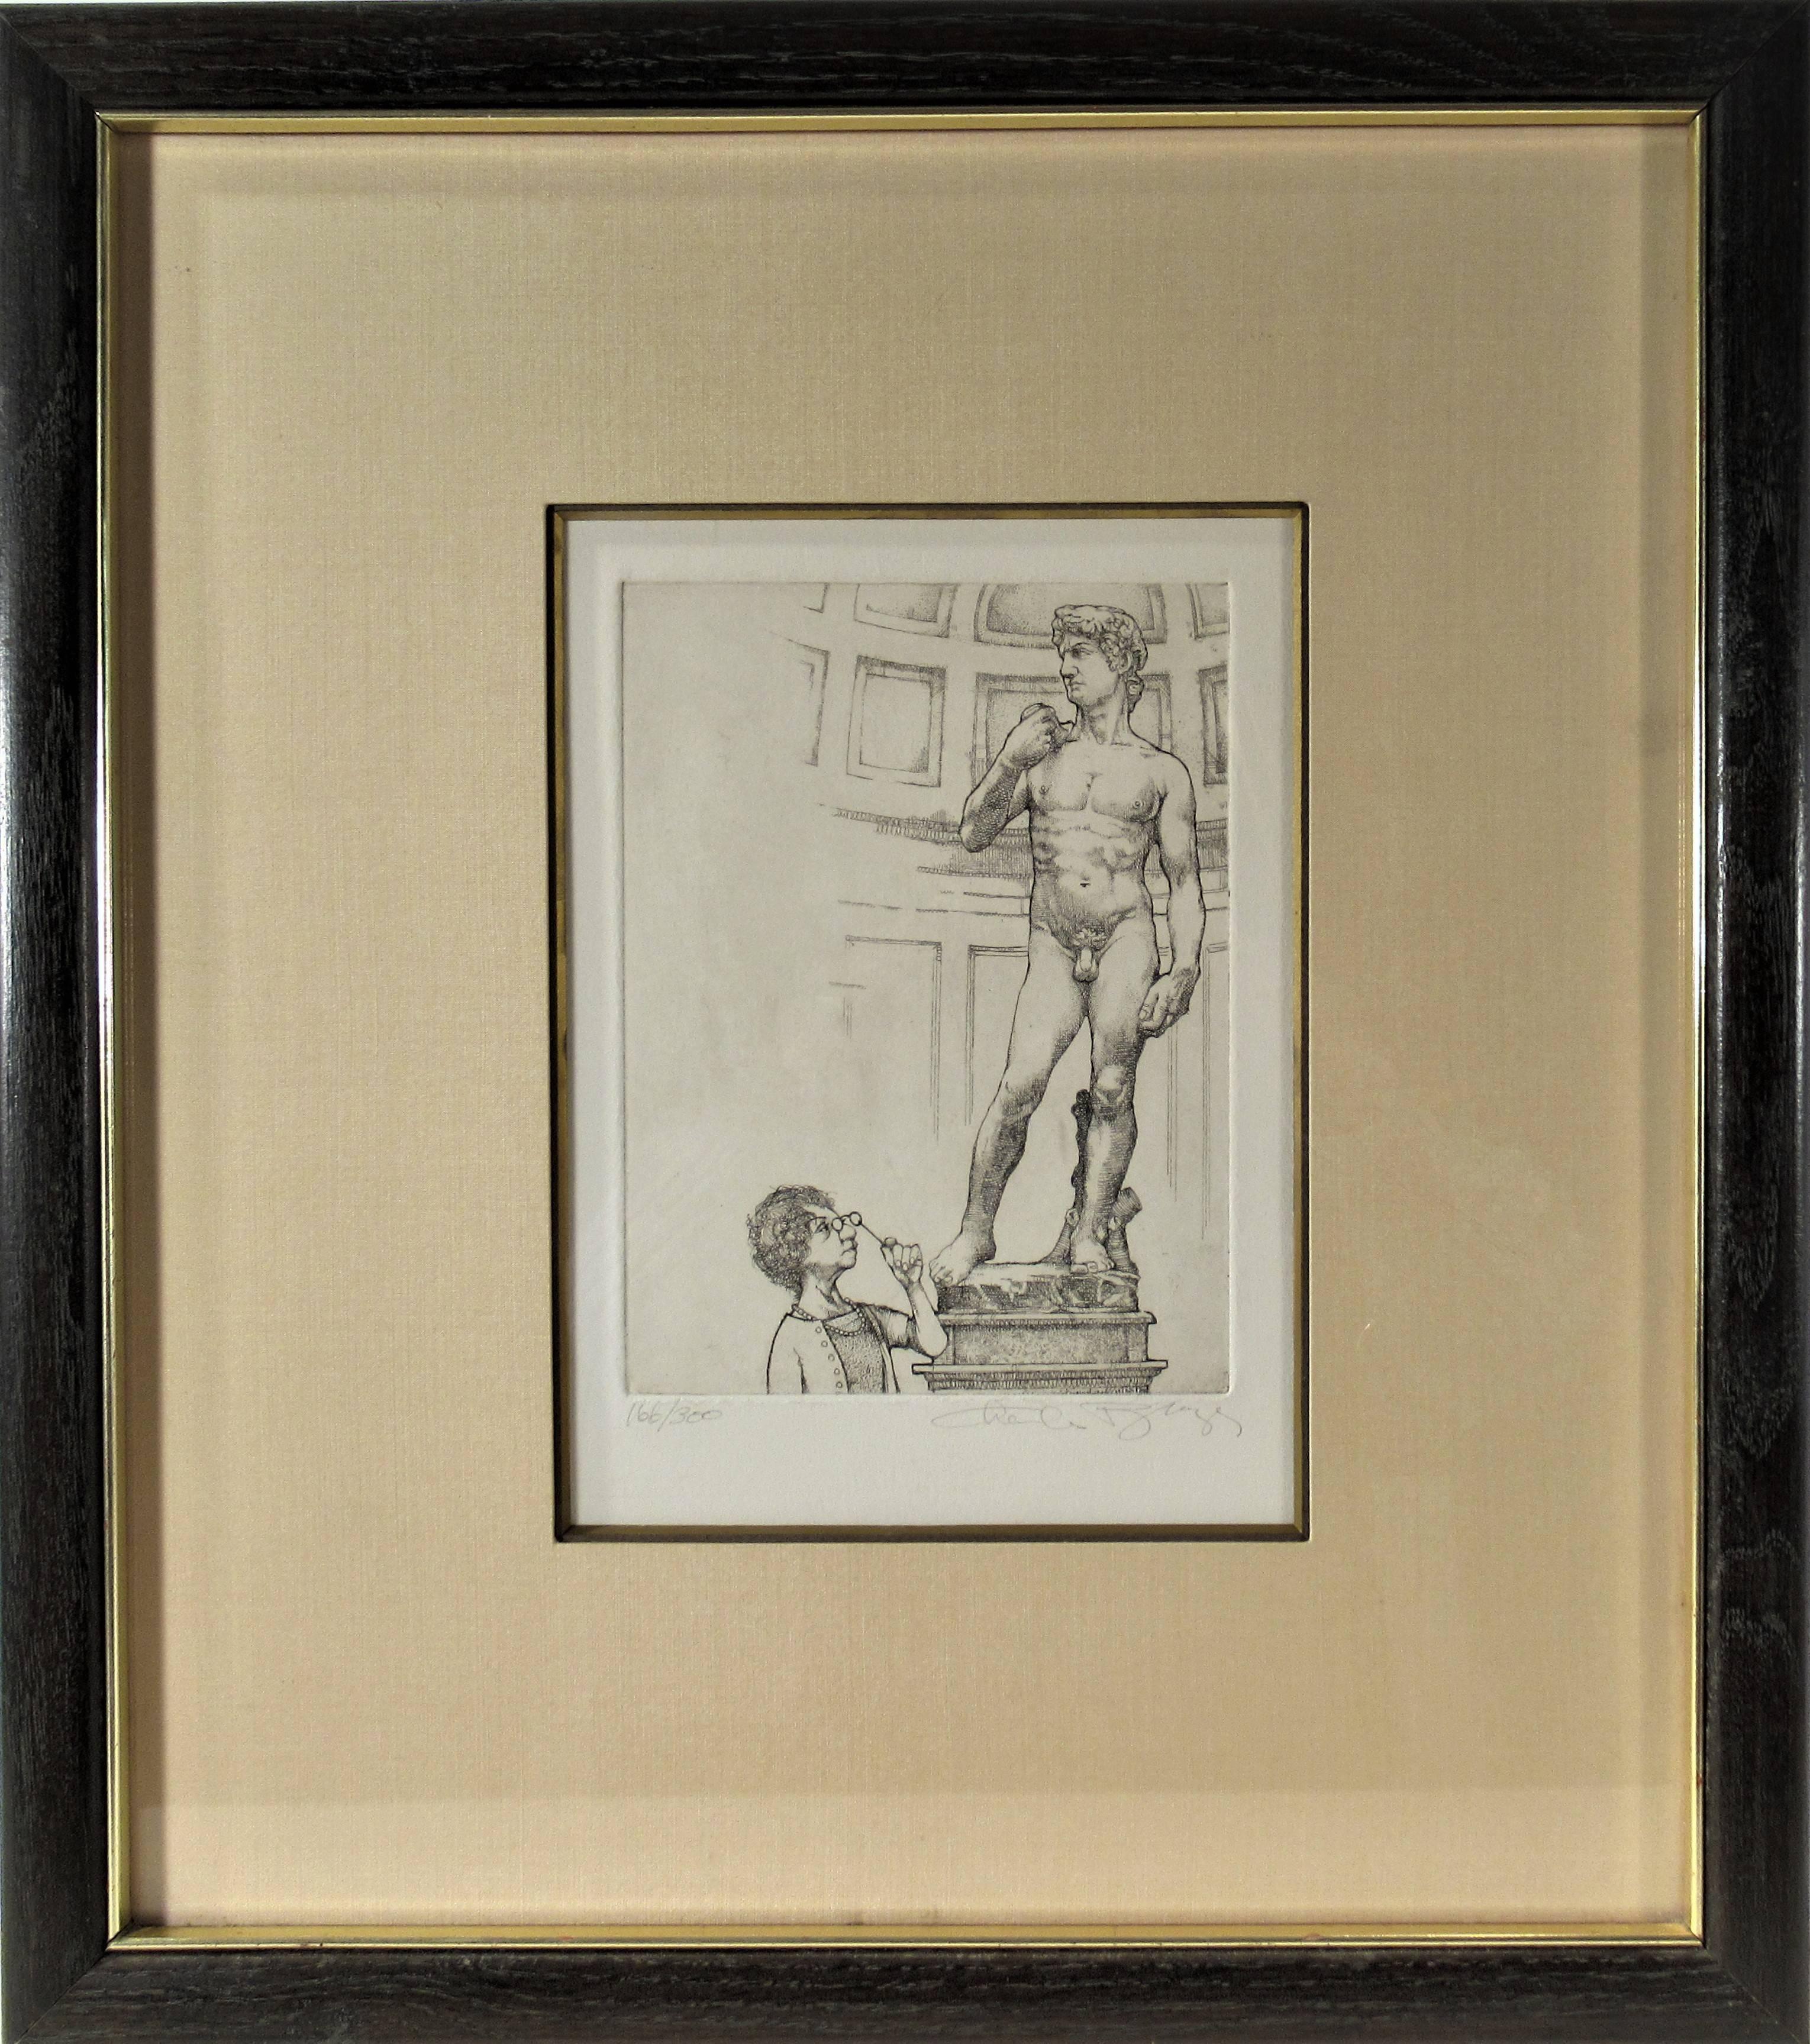 Charles Bragg Figurative Print - Untitled, Old woman looking a naked man sculpture